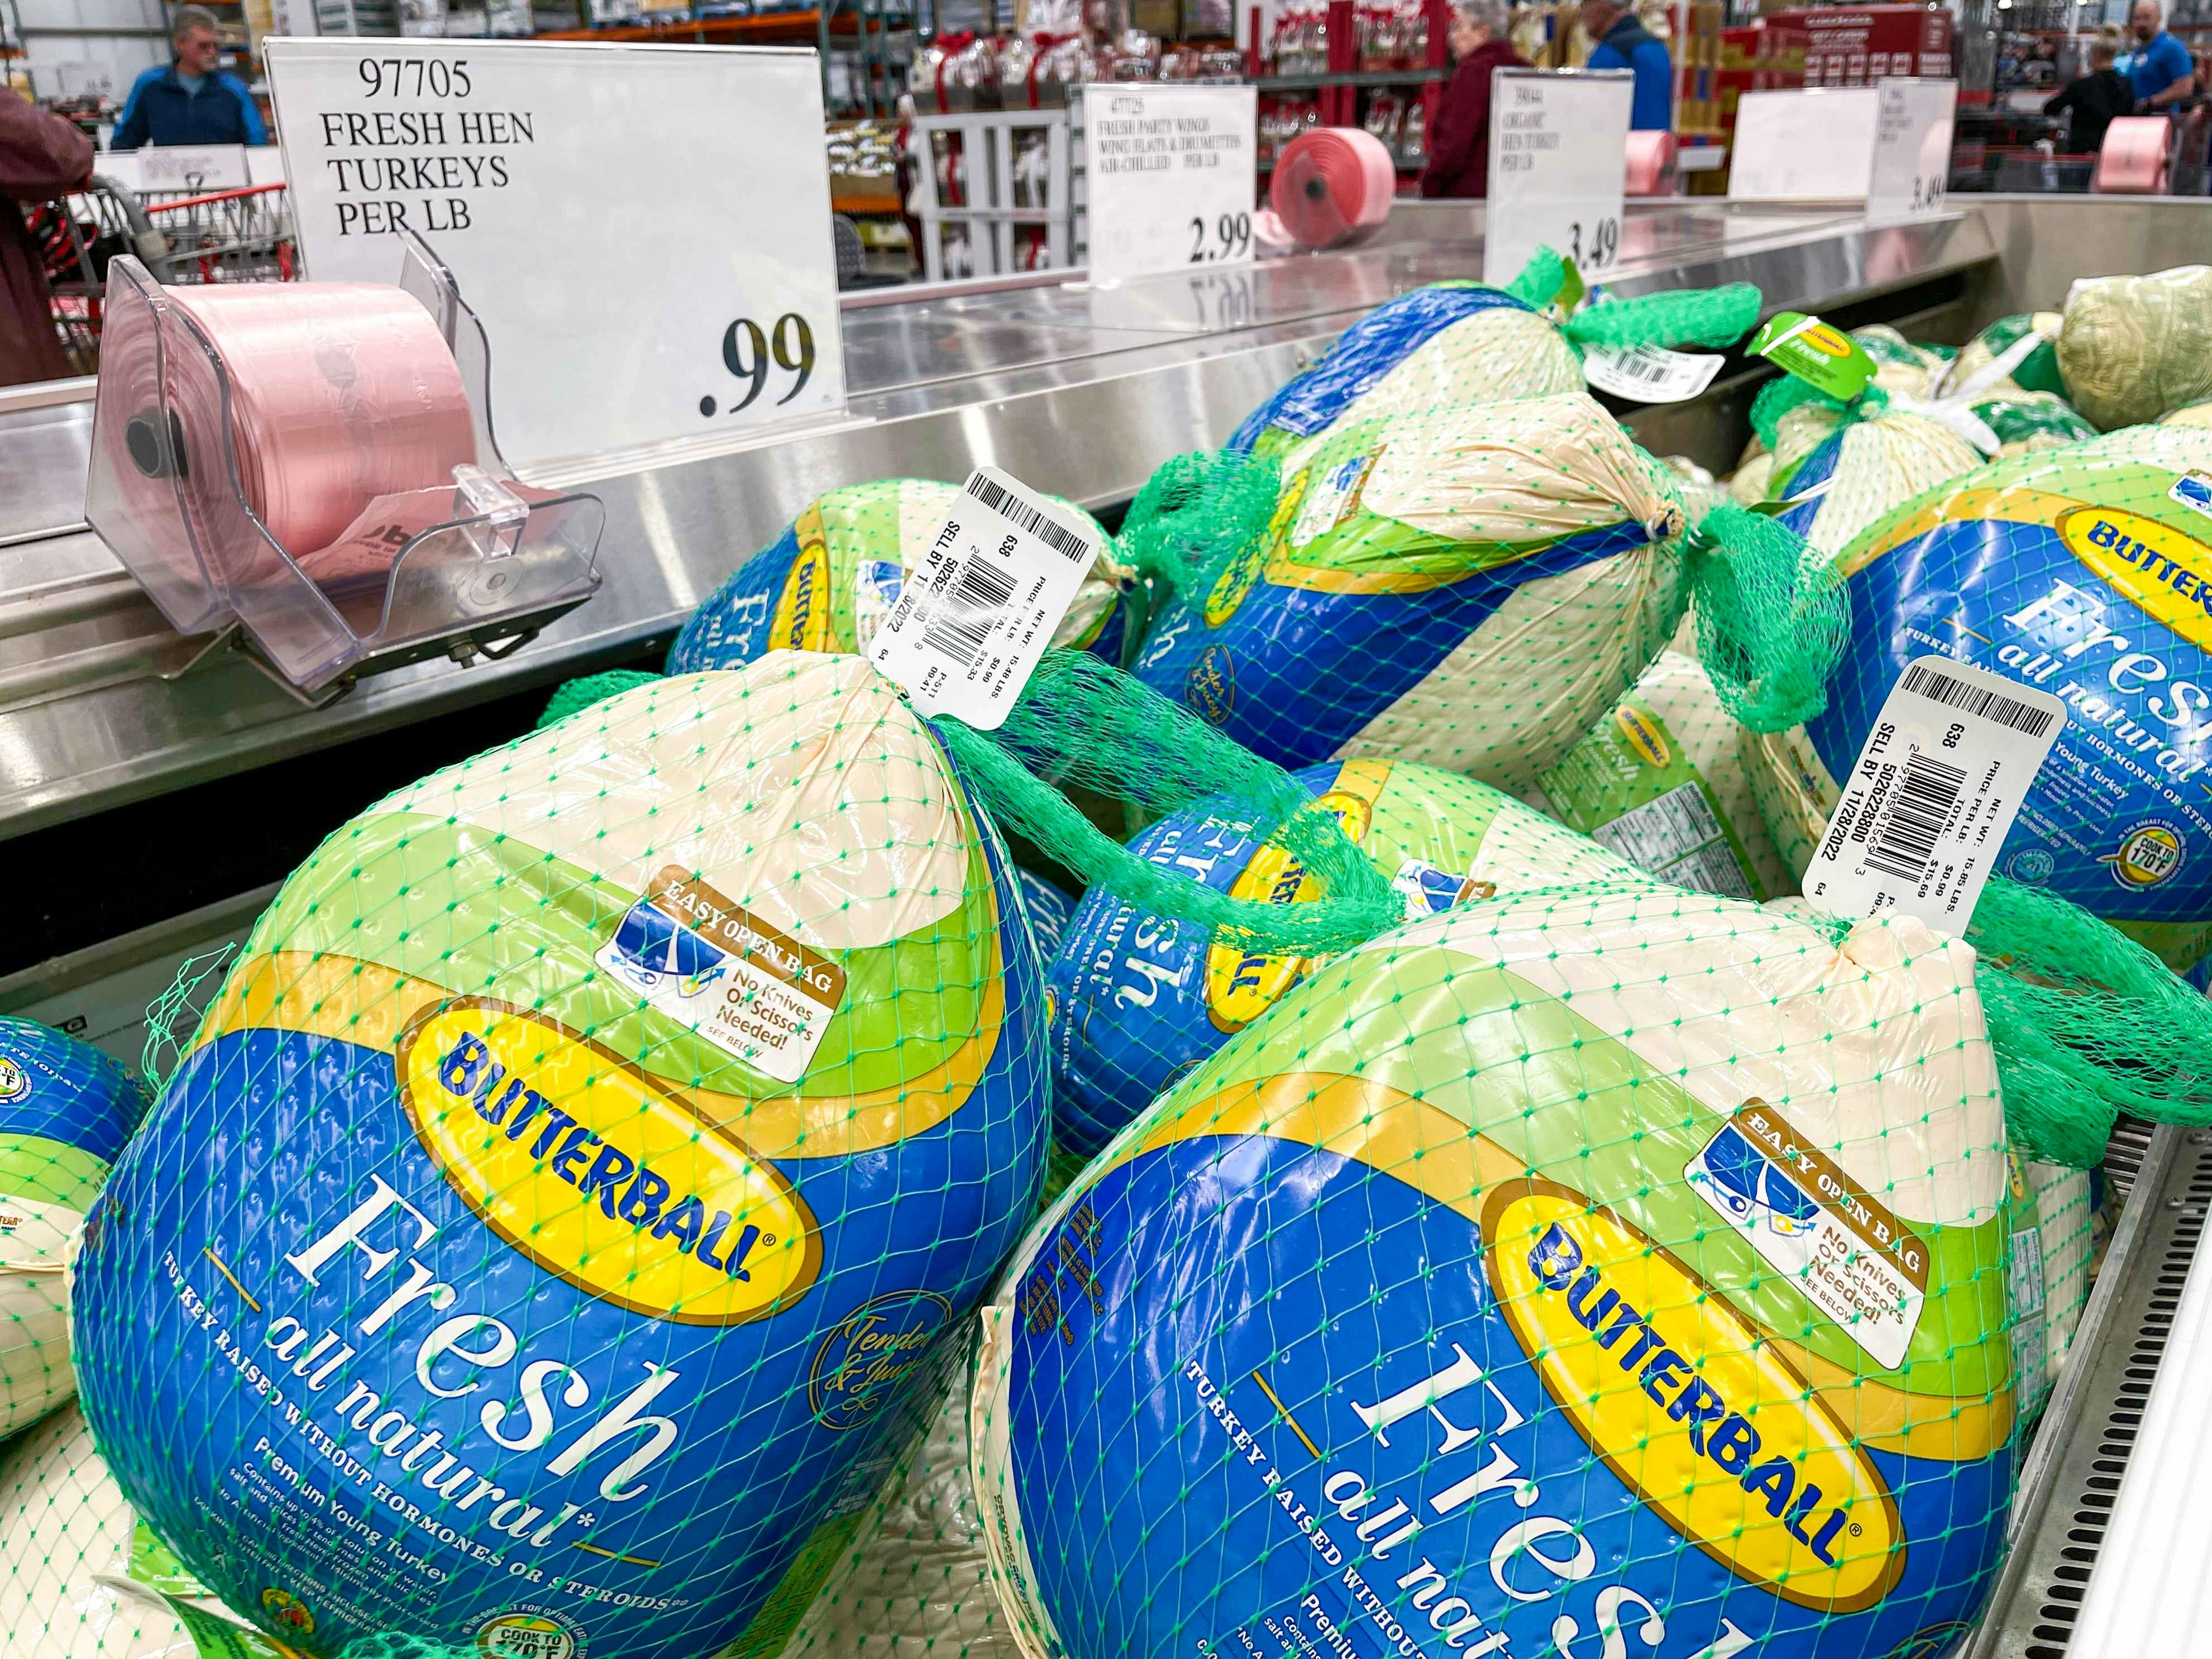 Whole Fresh Butterball turkeys in the refrigerated meat section of Costco with a sign showing them to be 99 cents per pound